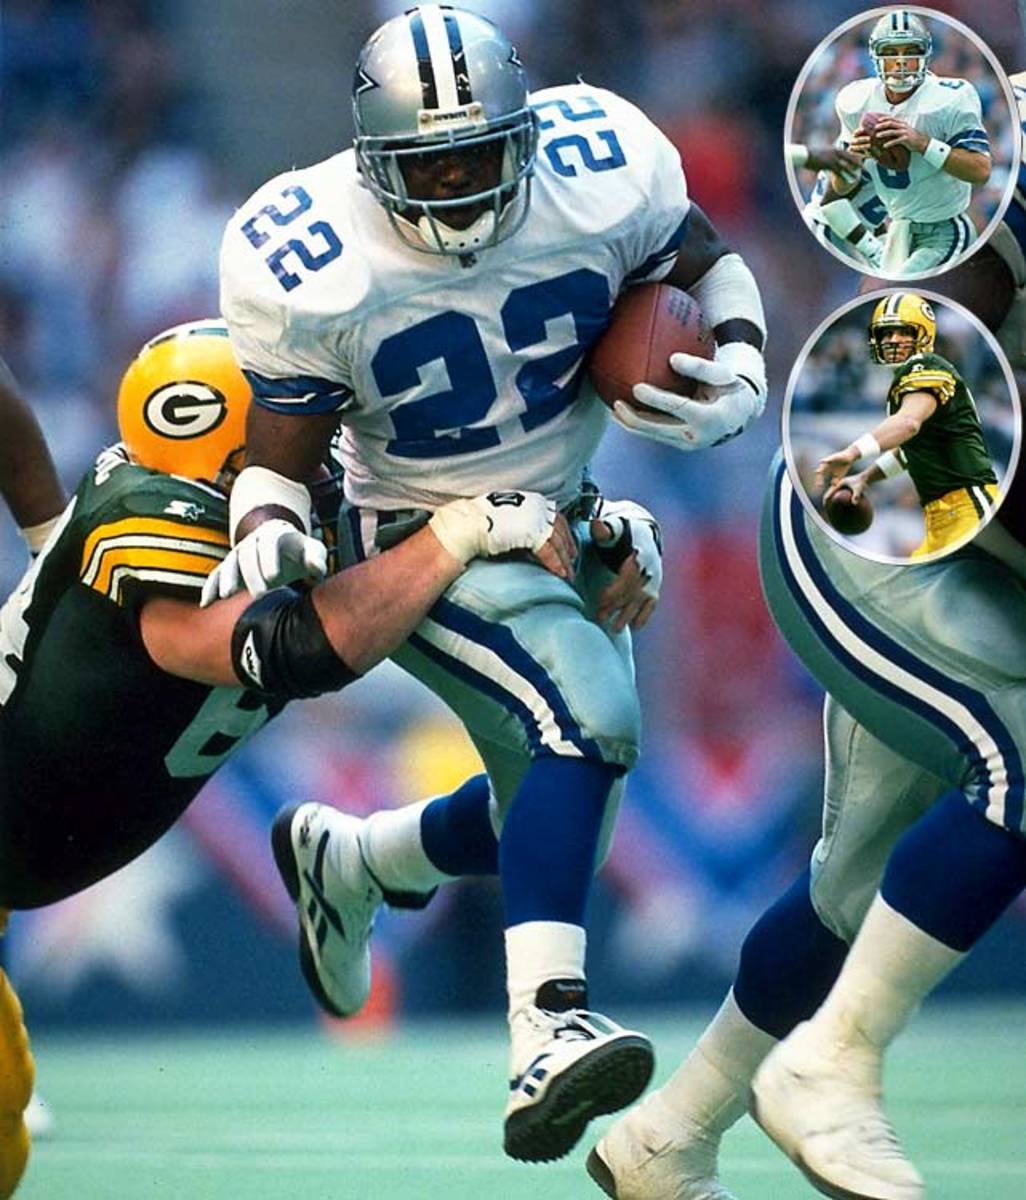 1995: Cowboys 38, Packers 27